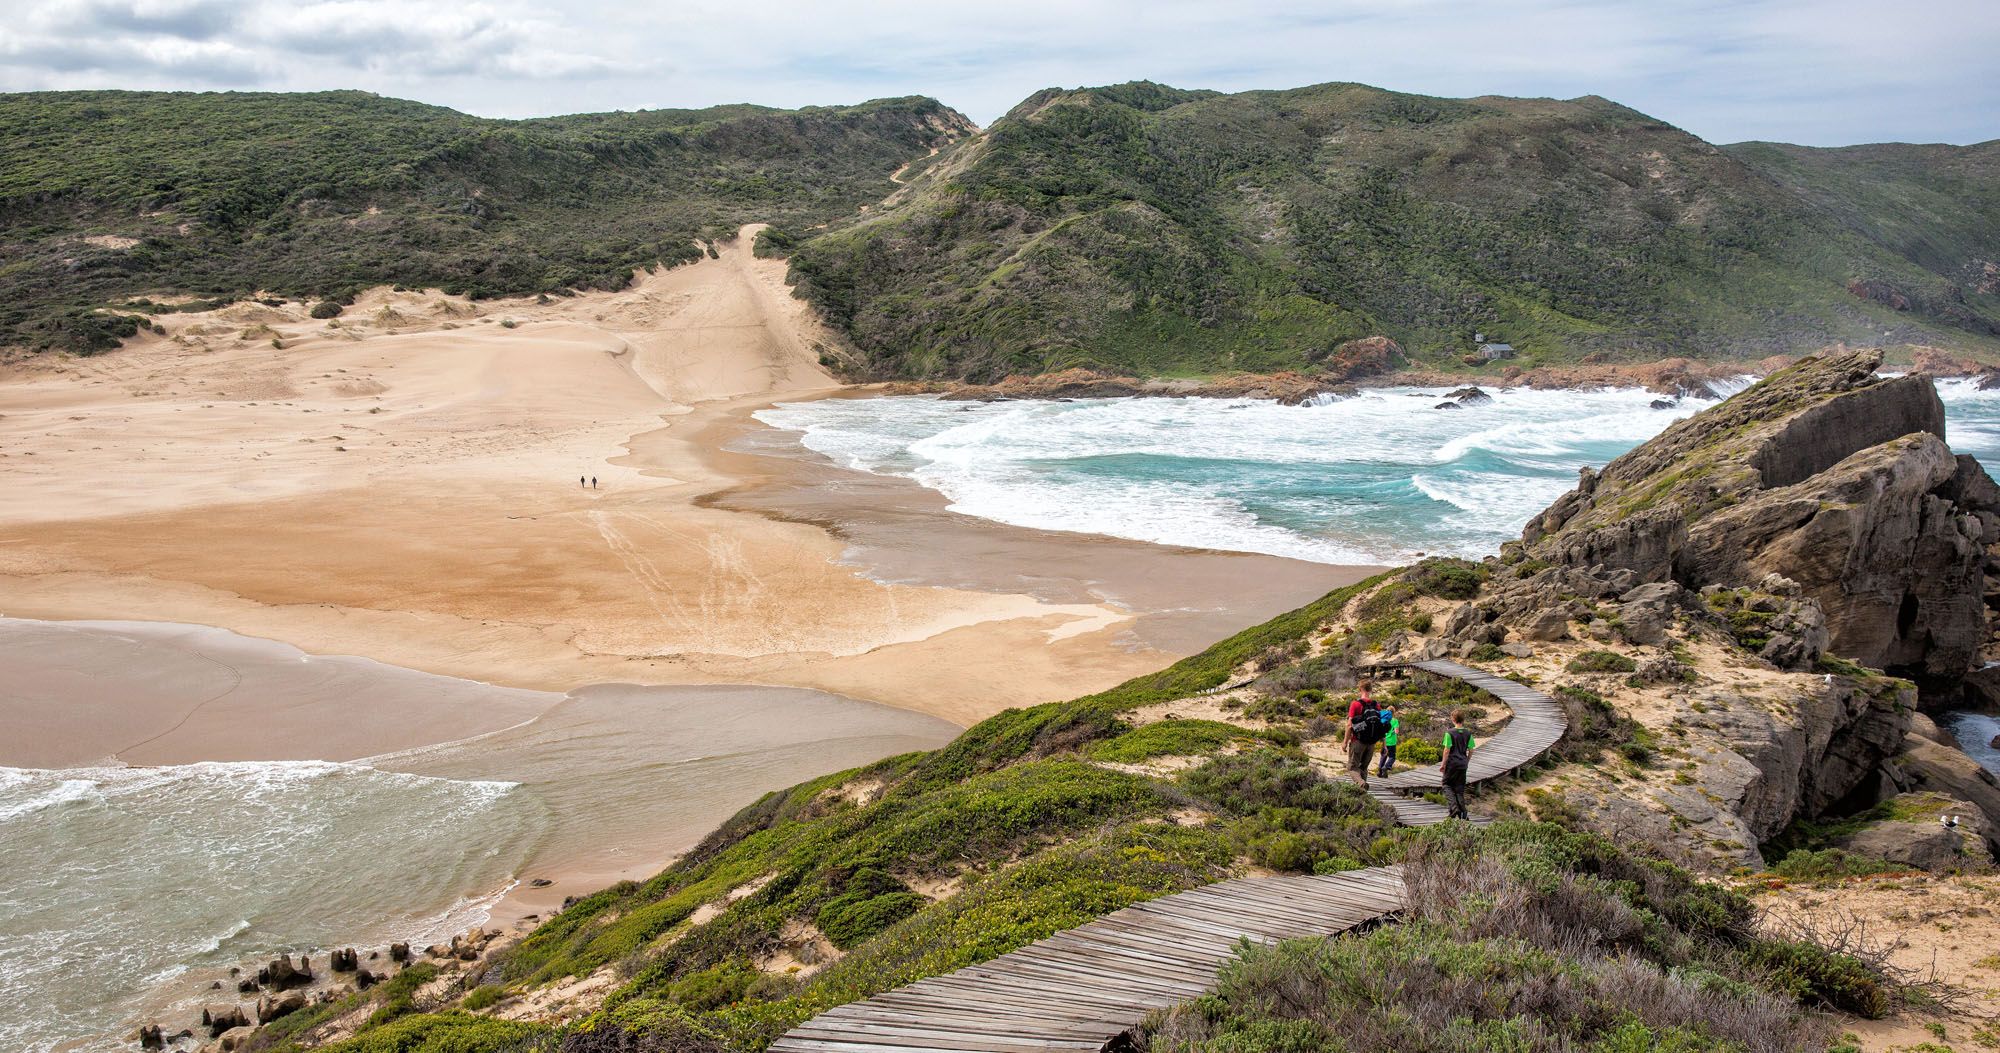 Featured image for “Hiking Robberg Peninsula in South Africa”